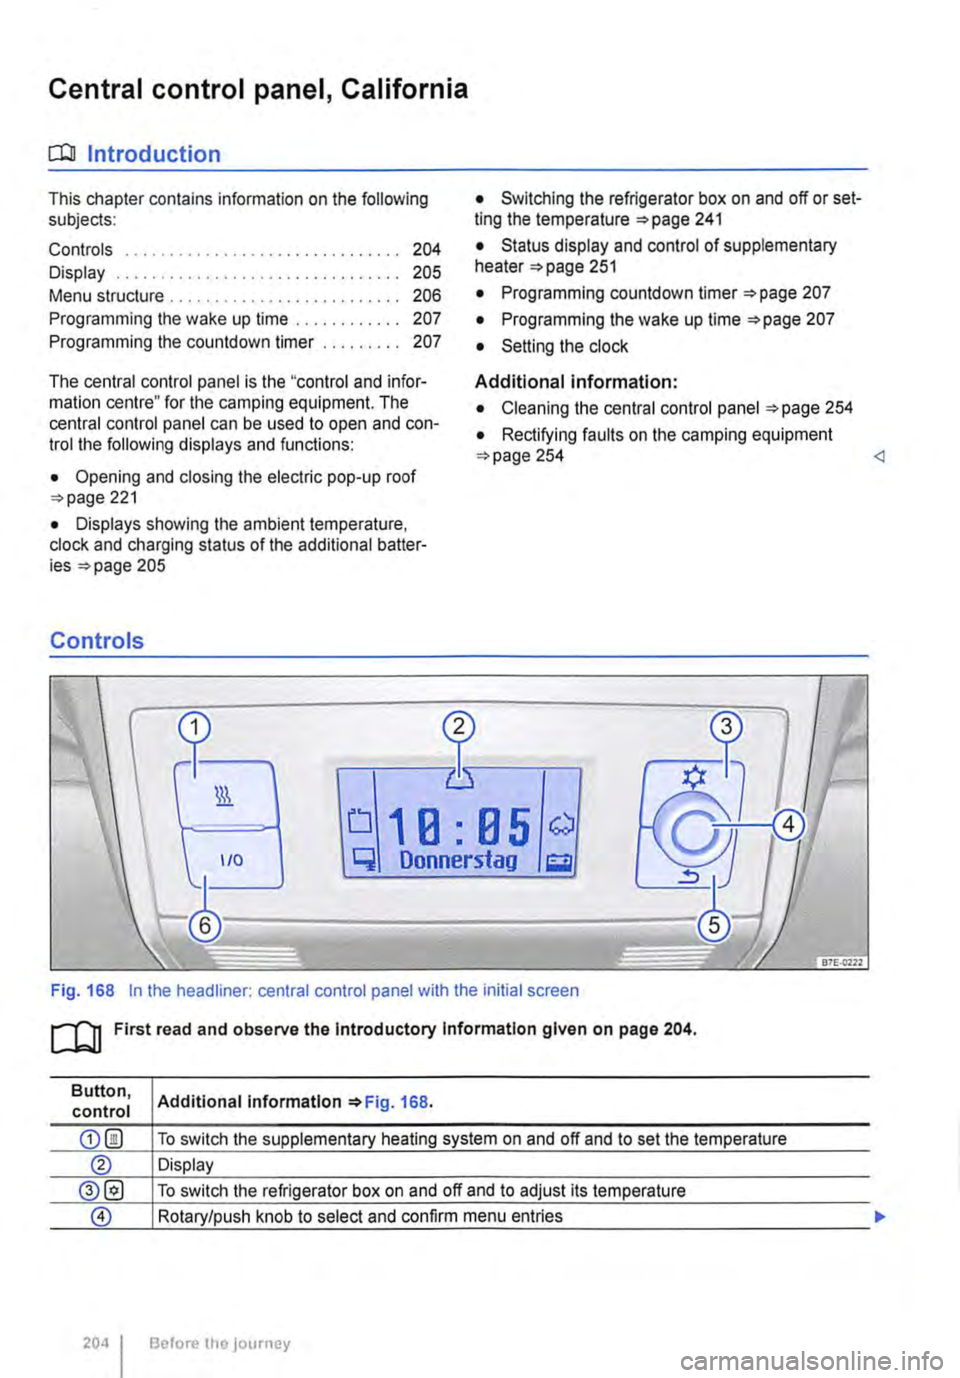 VOLKSWAGEN TRANSPORTER 2011  Owners Manual Central control panel, California 
COl Introduction 
This chapter contains information on the following subjects: 
Controls . . . . . . . . . . . . . . . . . . . . . . . . . . . . . . . 204 
Display .